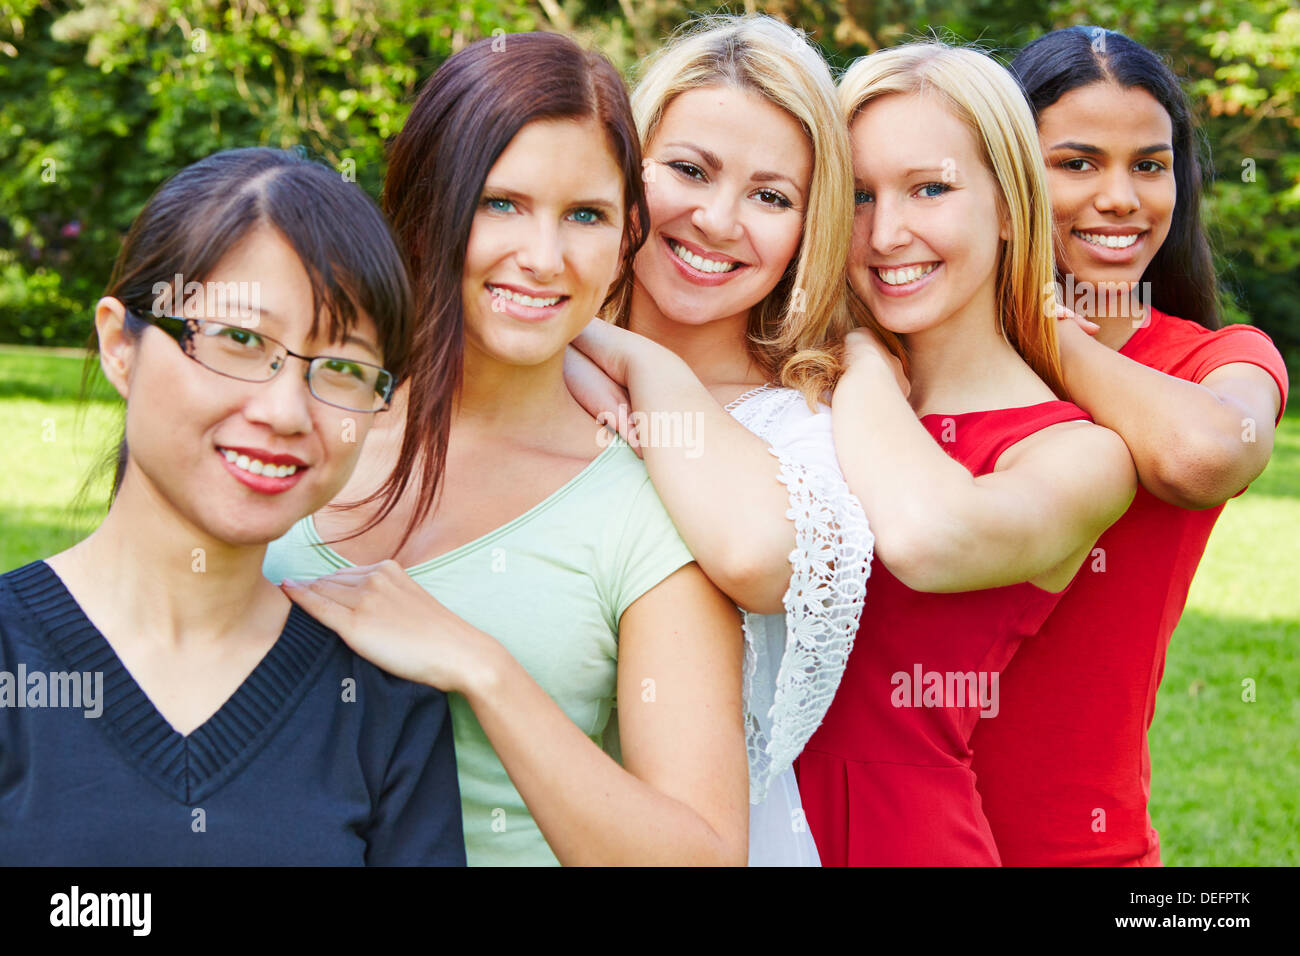 Team of five happy young women smiling in nature Stock Photo